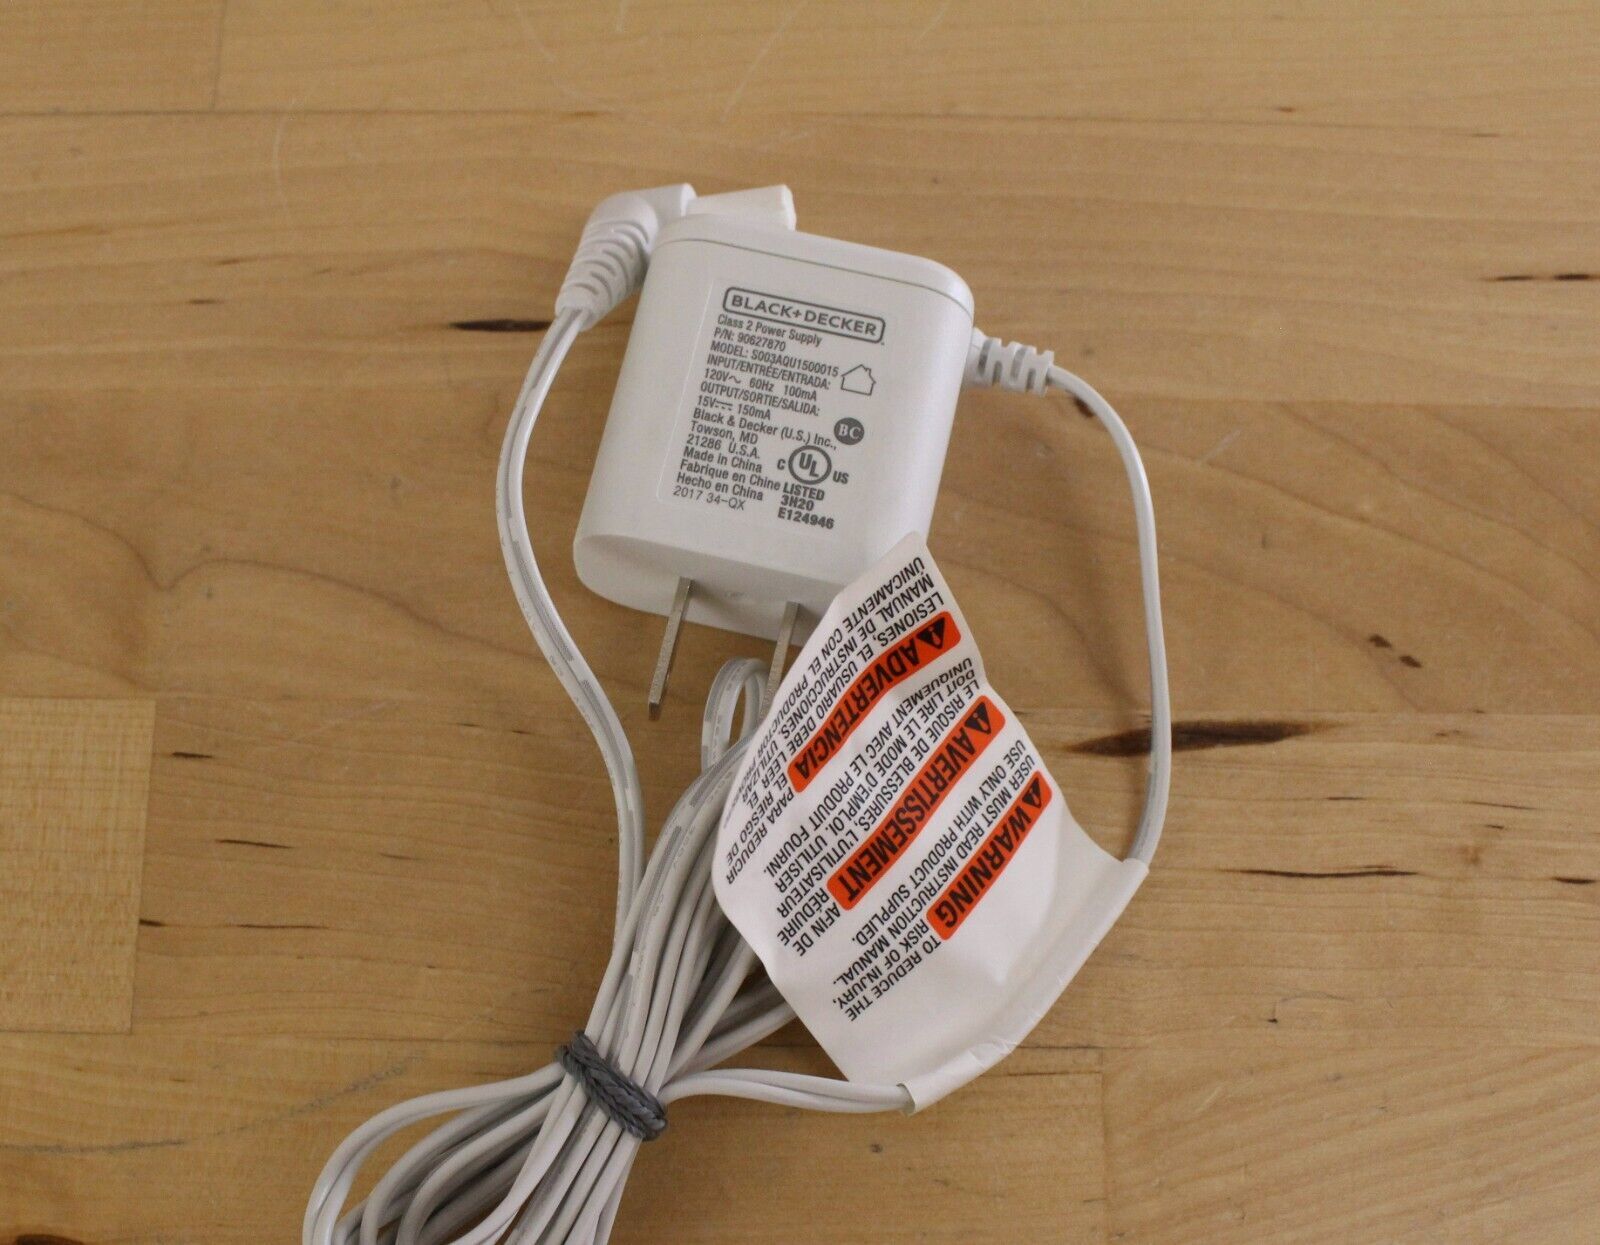 BLACK & DECKER Dustbuster Vacuum Charger 15V Power Adapter 90627870 - $8.90